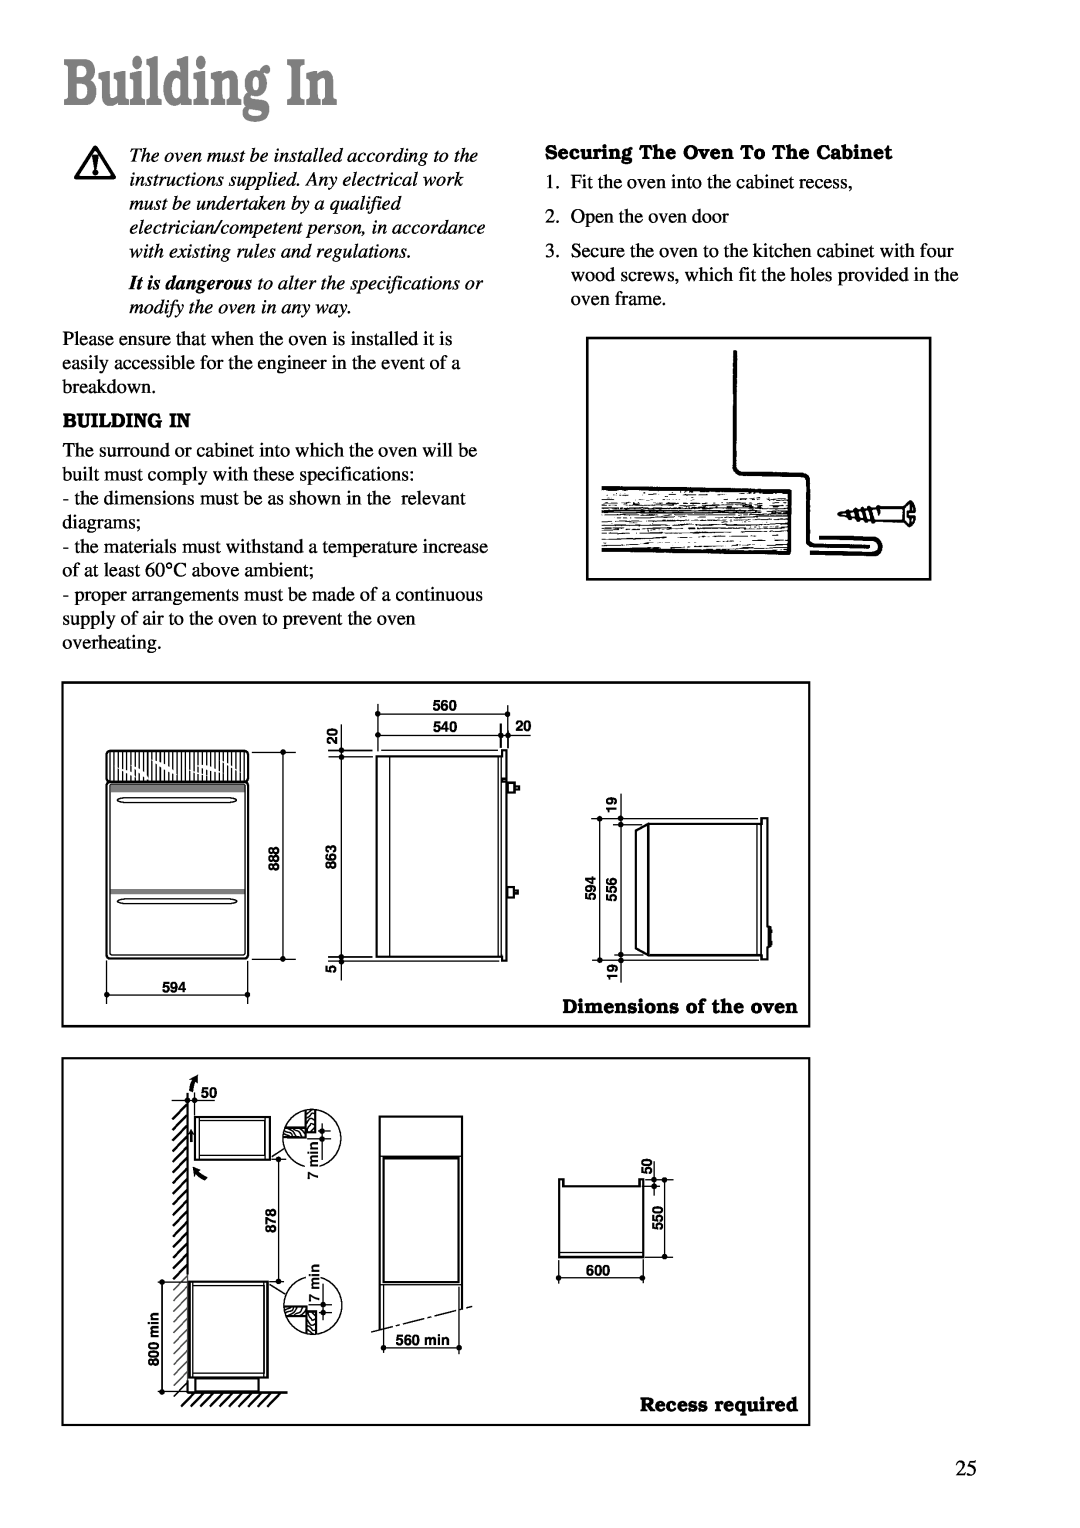 Zanussi ZDF 866 manual Building In, Securing The Oven To The Cabinet, Dimensions of the oven, Recess required 